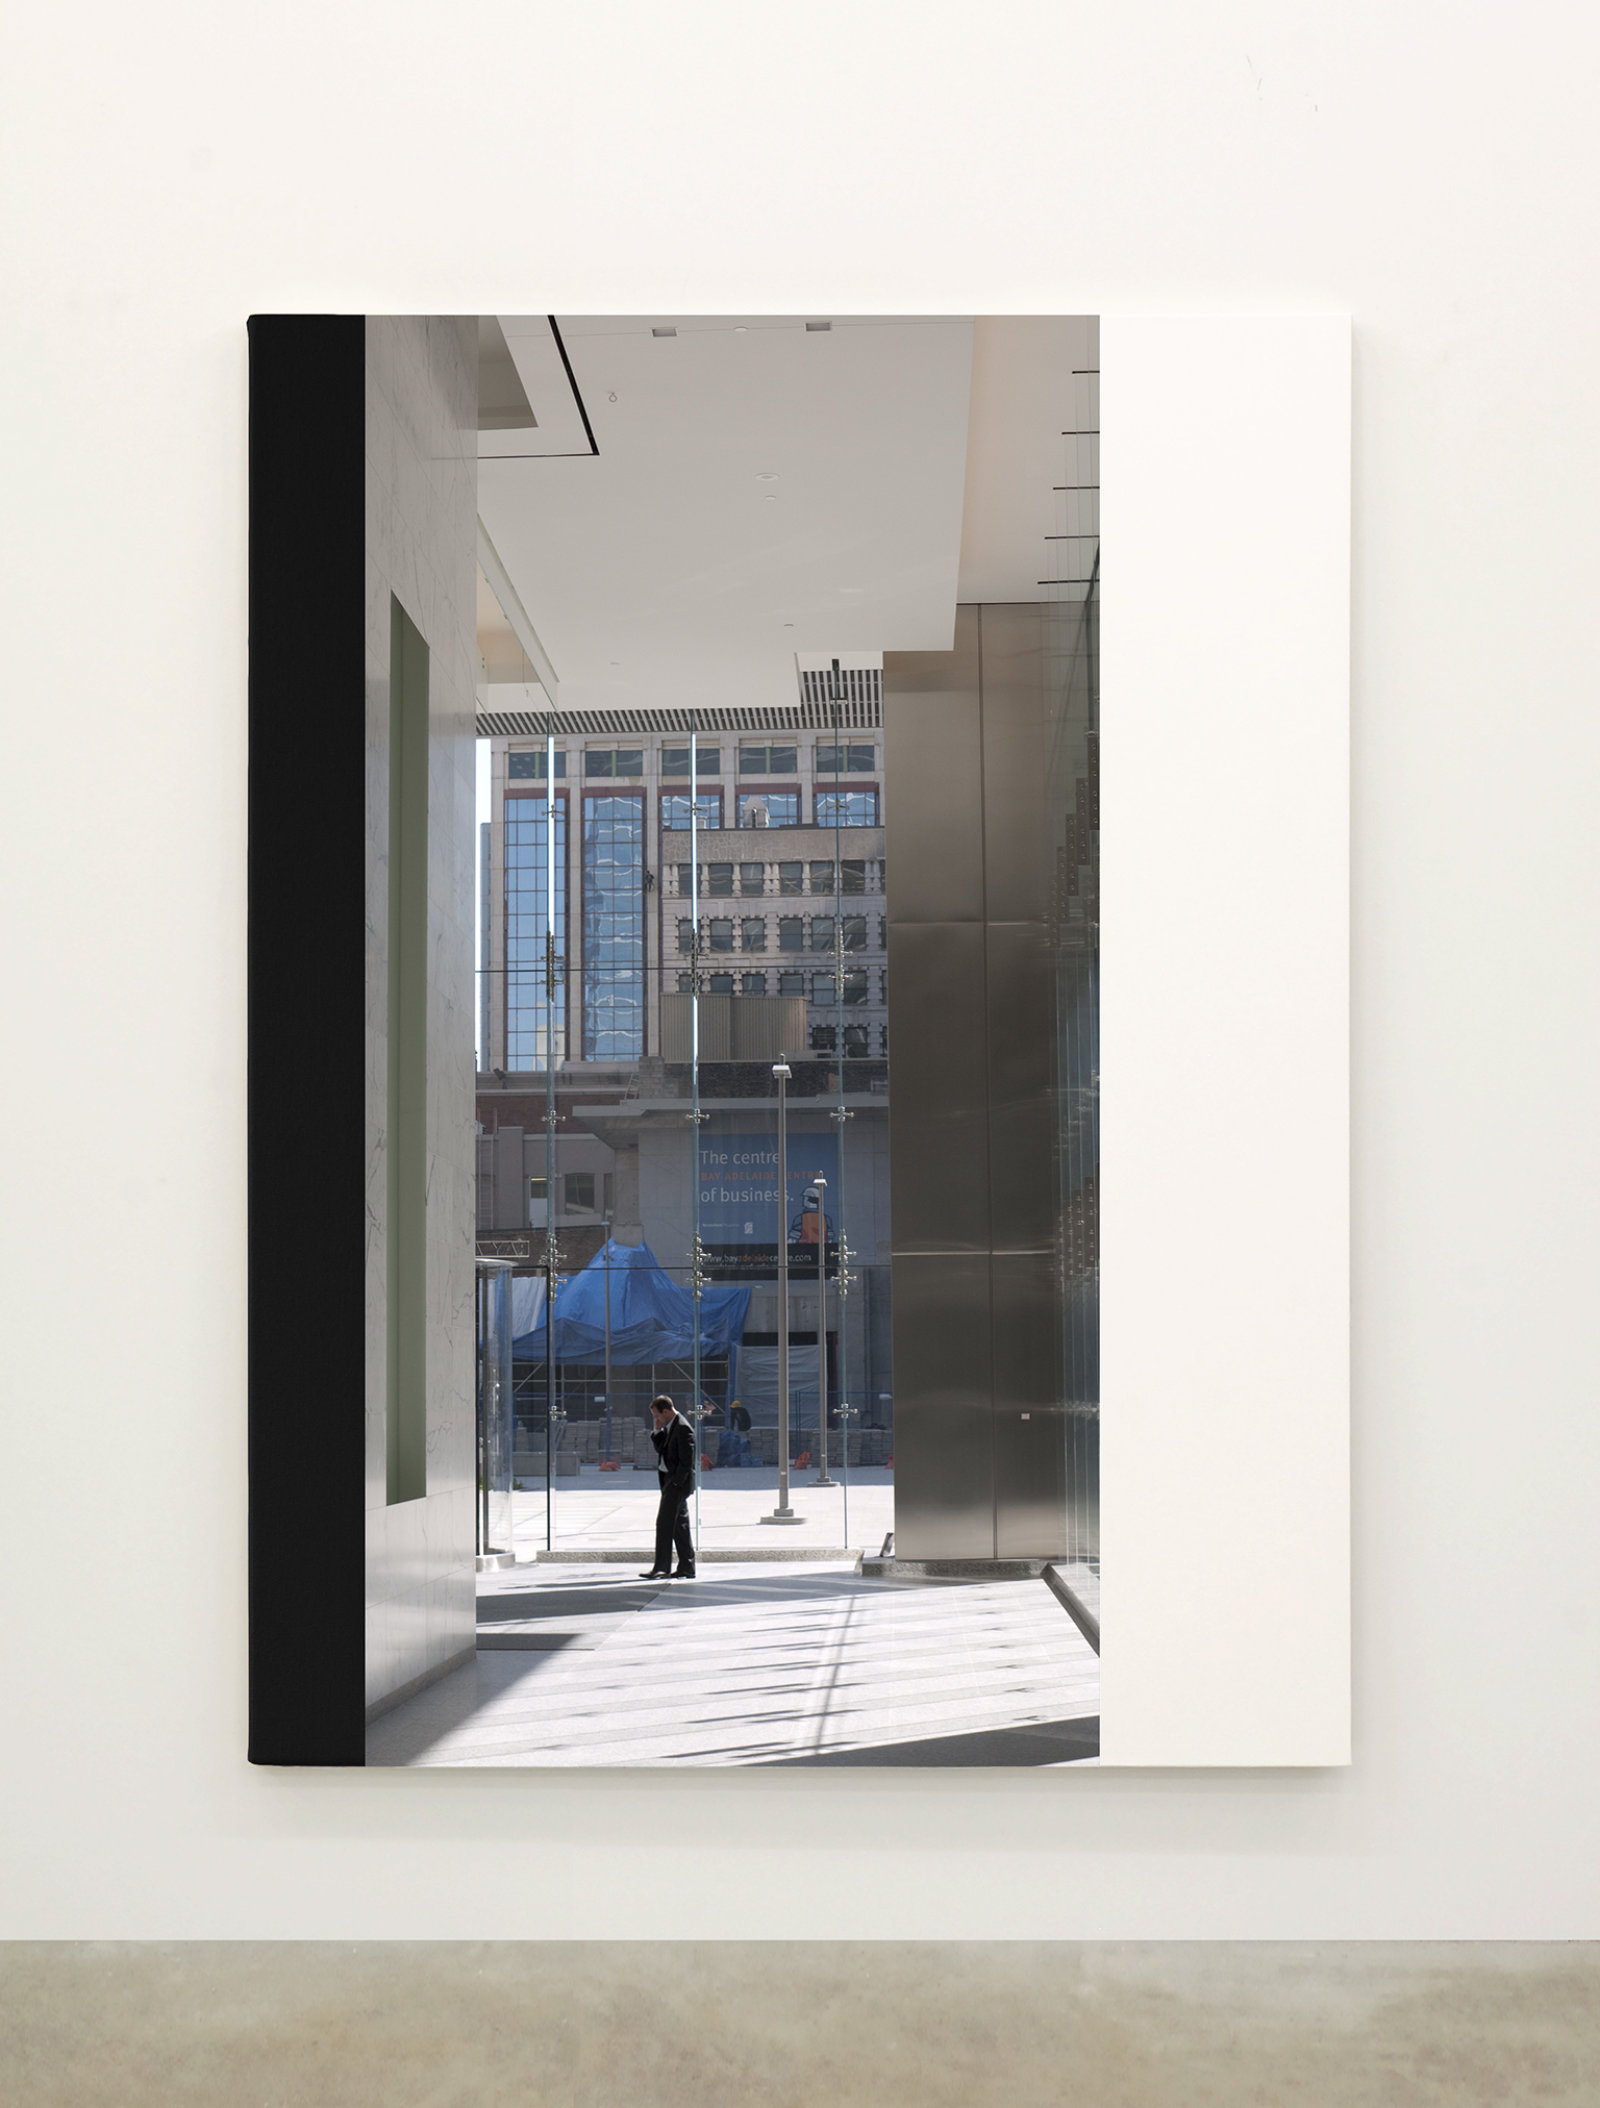 Ian Wallace, Abstract Painting VIII (The Financial District), 2010, 12 photolaminate with acrylic on canvas panels, each 96 x 72 in. (244 x 183 cm)